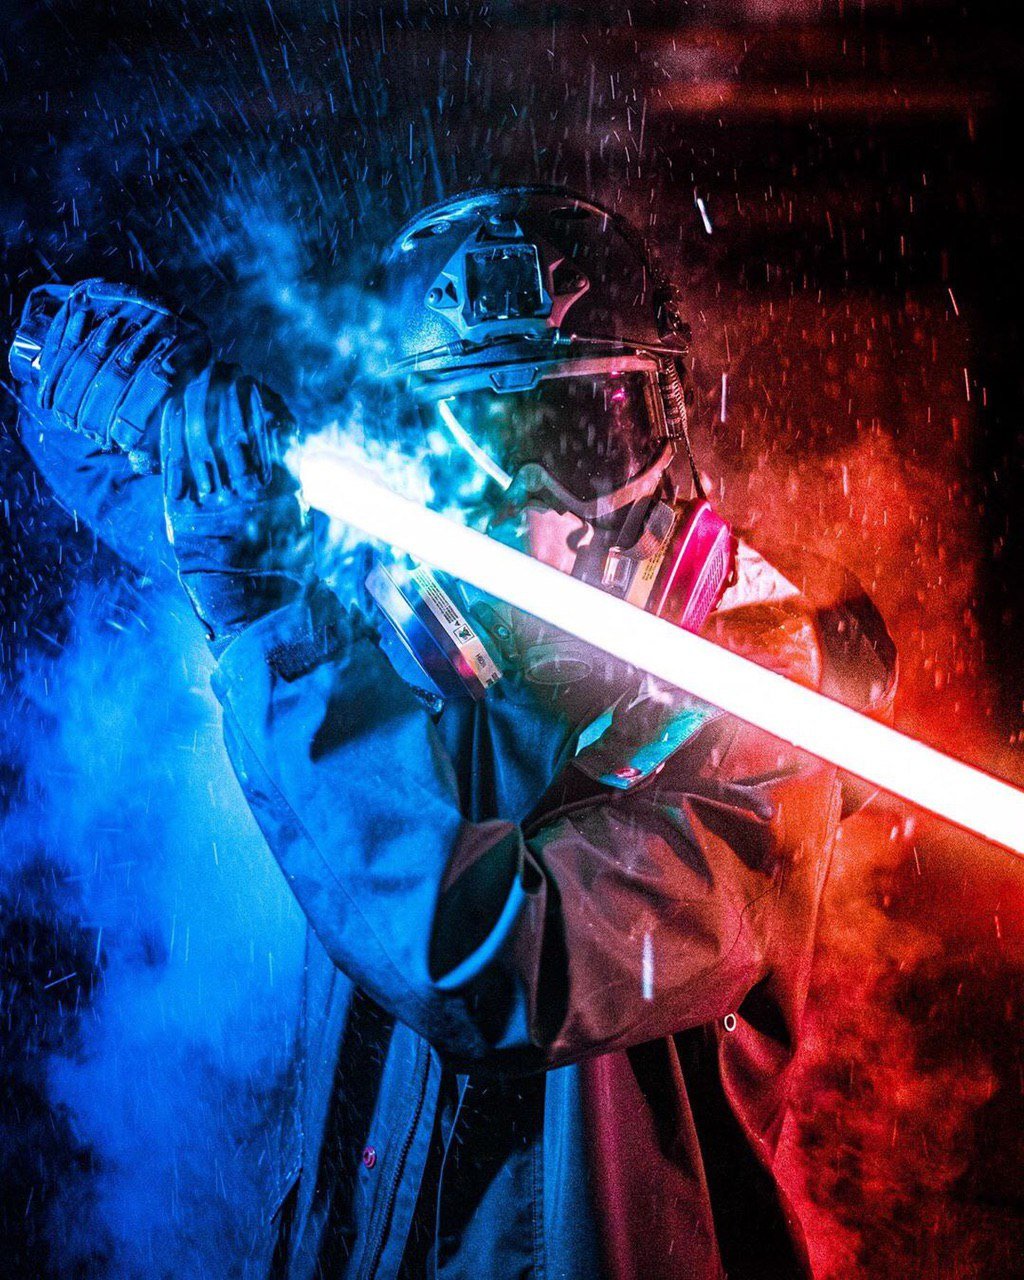 An edited photograph of a protestor in helmet, ballistic goggles and half-face respirator. They are wearing heavy-duty gloves and wielding a lightsaber. The protestor is standing in the rain against a smoky backdrop. The left side of the image is lit up in blue, while the right-hand side is in red.